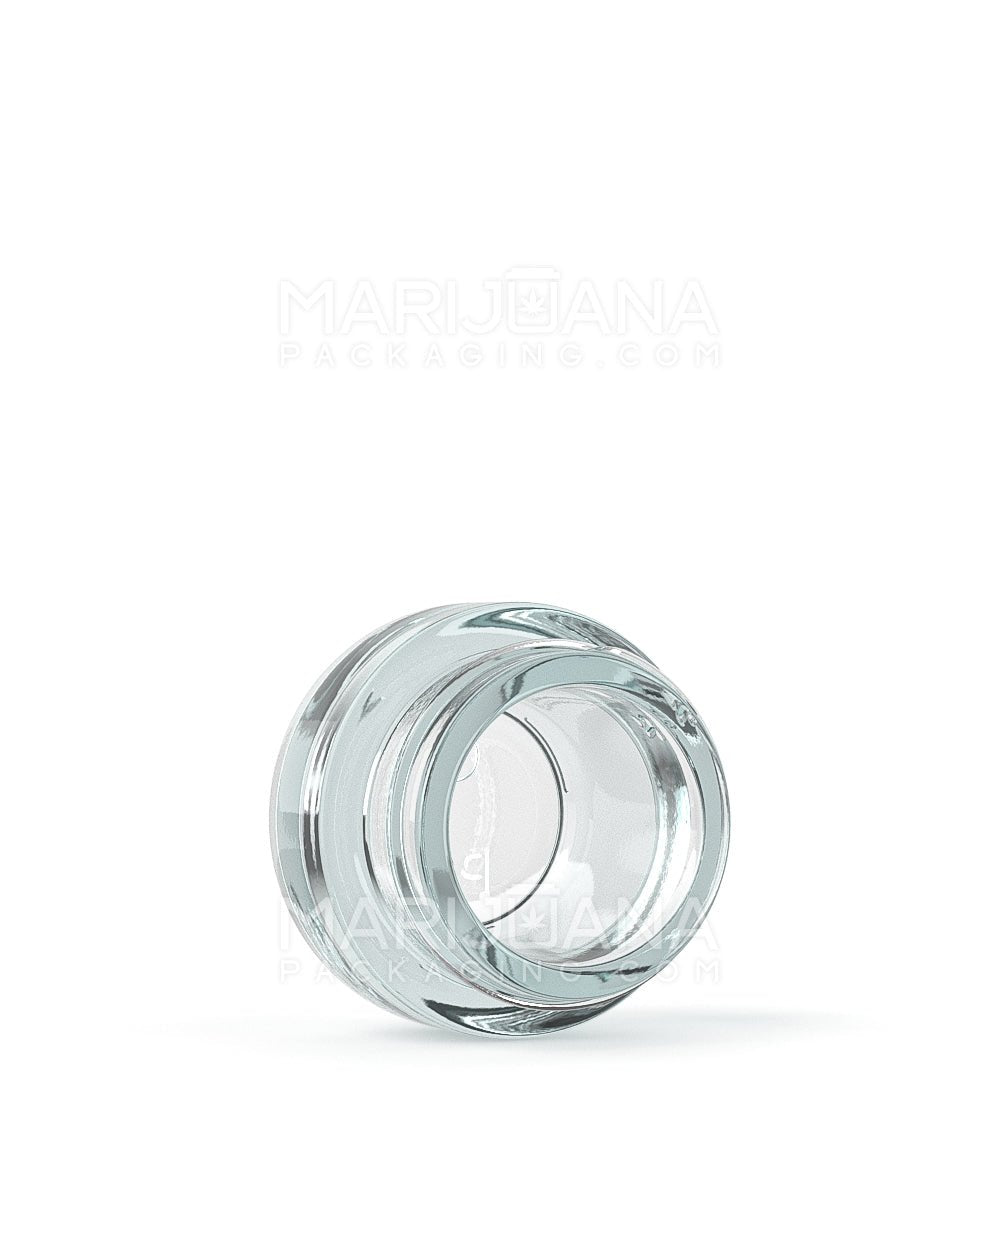 POLLEN GEAR | HiLine Glossy Clear Glass Concentrate Containers | 29mm - 5mL - 308 Count - 3